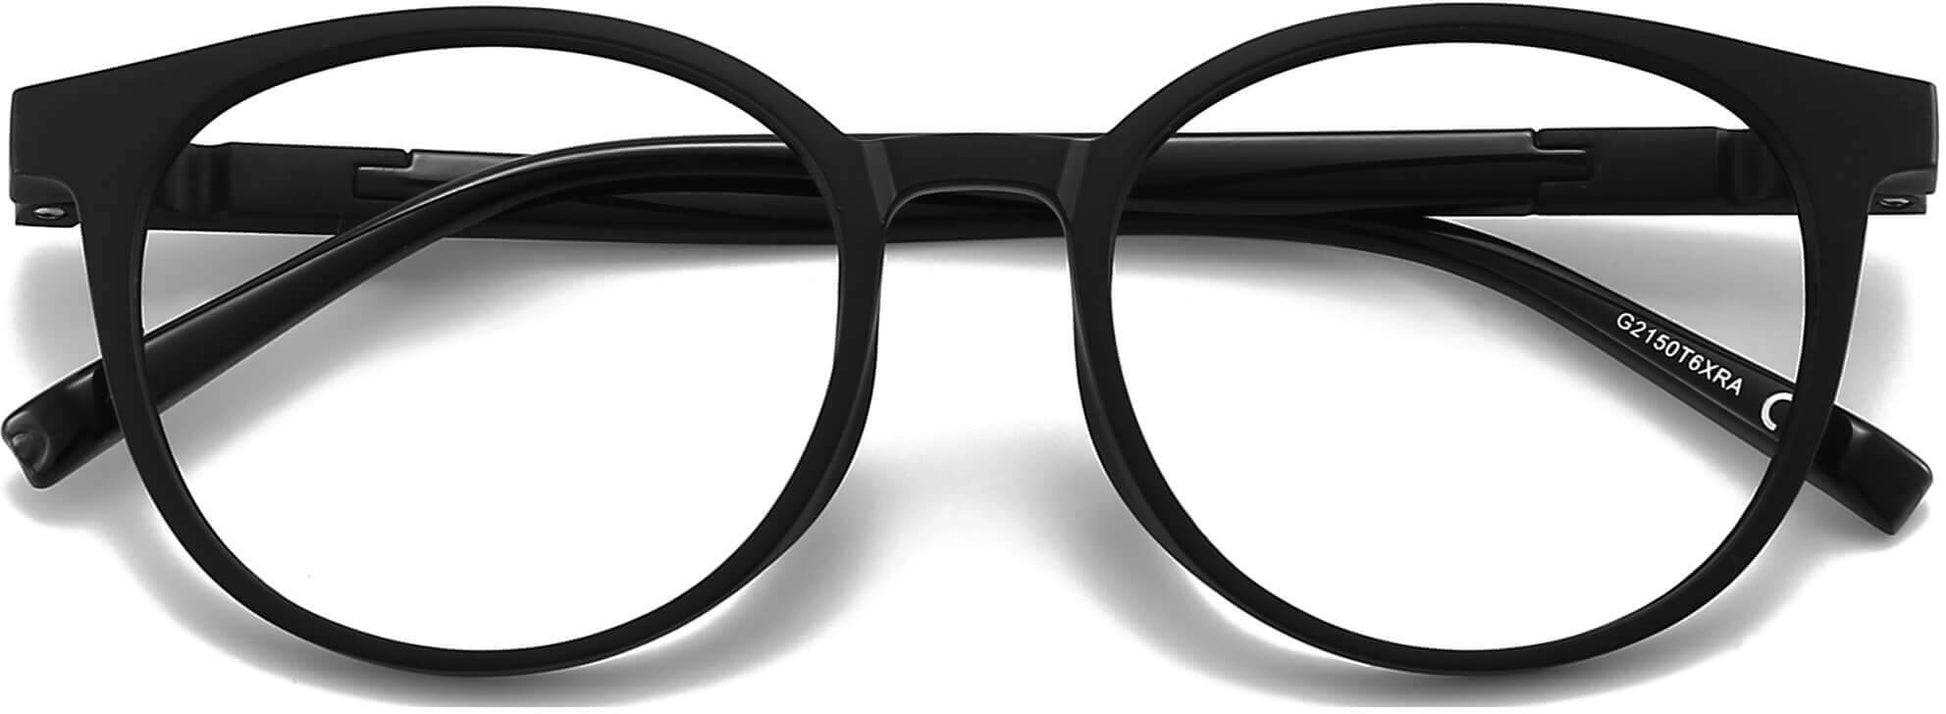 Calvin Round Black Eyeglasses from ANRRI, closed view